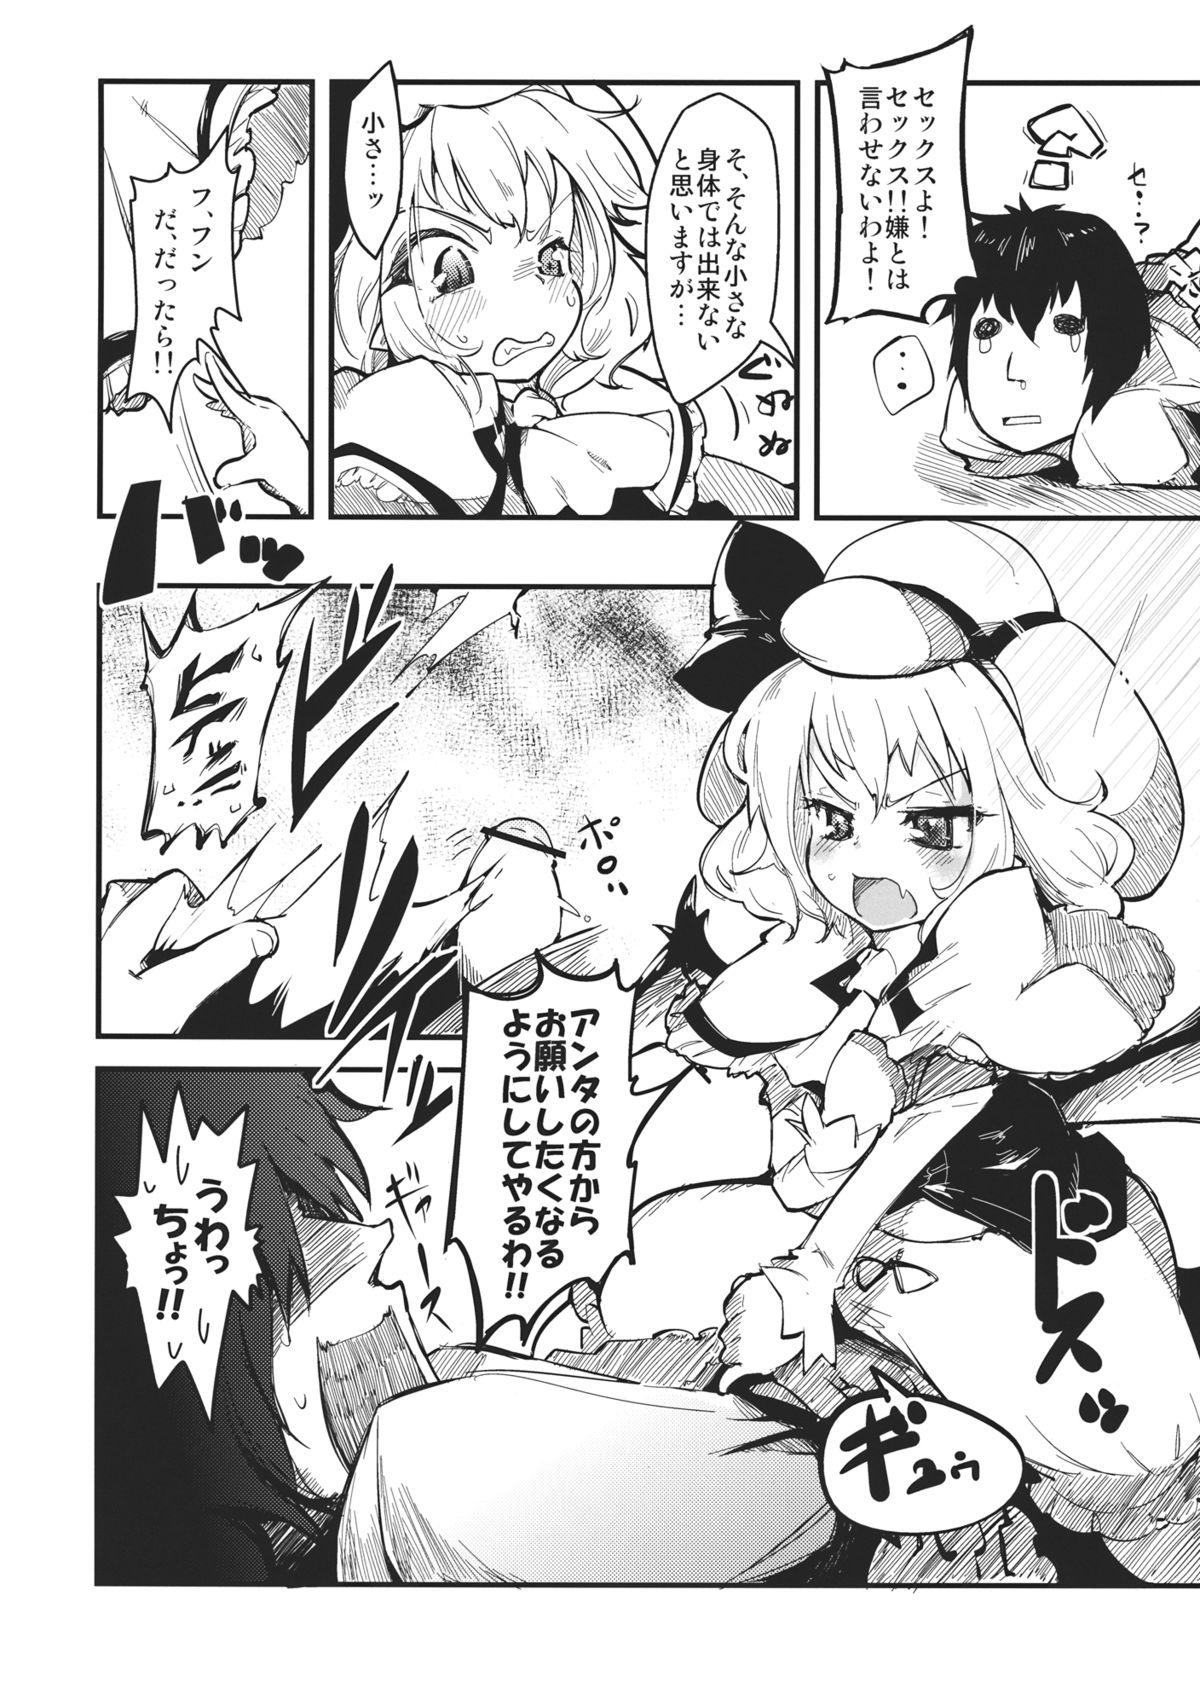 Closeups LolitaEmpress - Touhou project Belly - Page 6